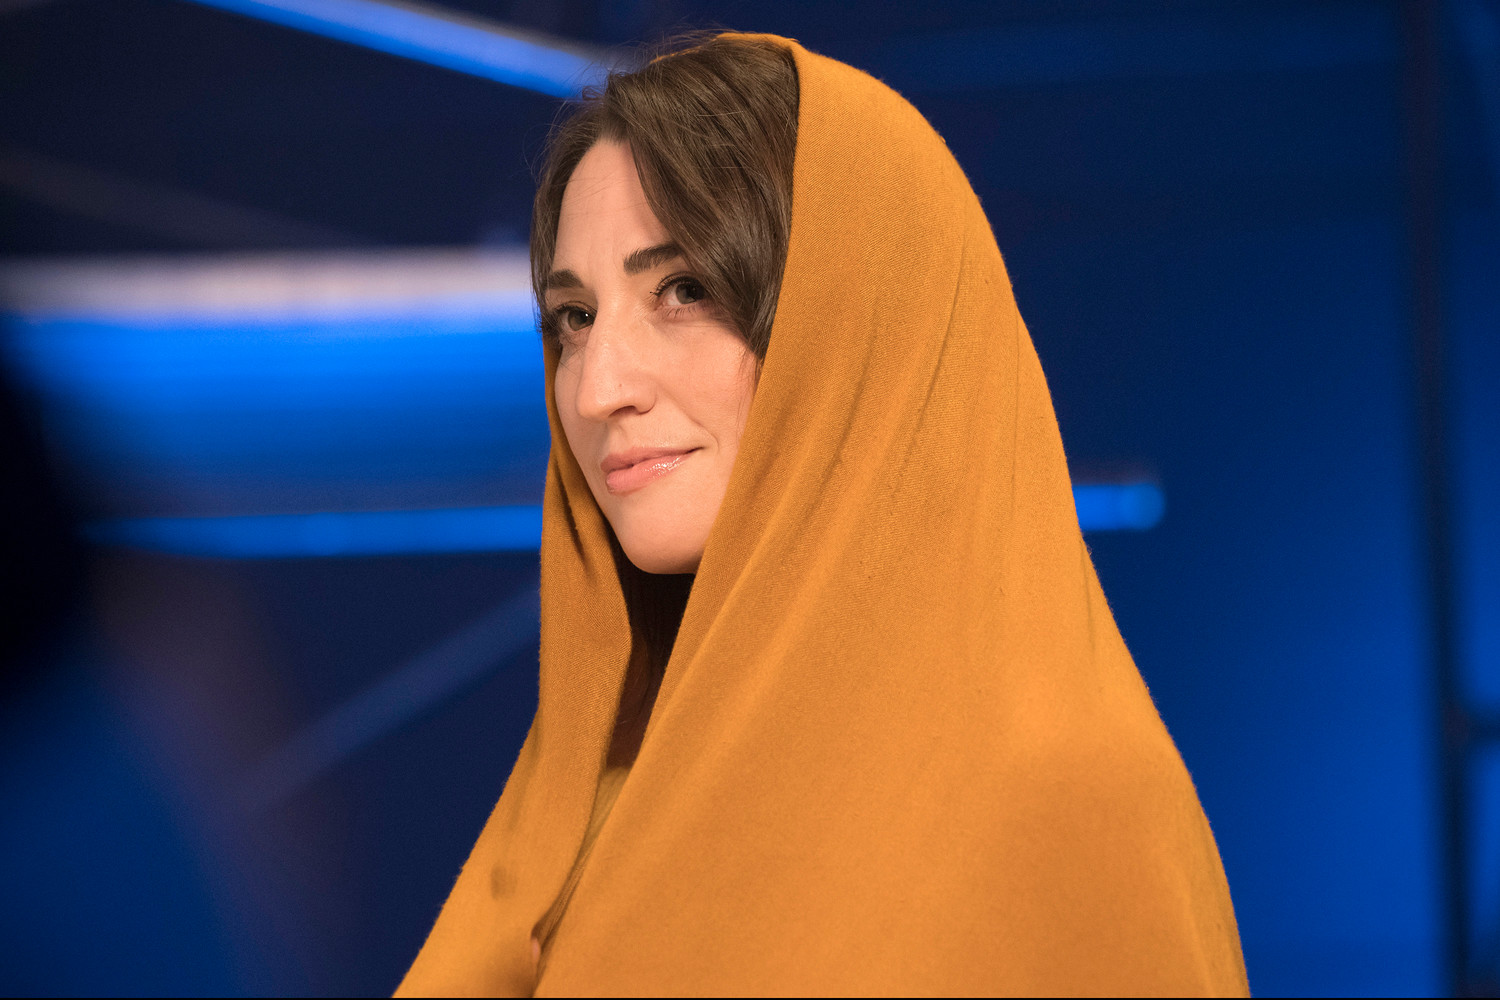 Sara Bareilles will portray Mary Magdalene in the NBC production of "Jesus Christ Superstar Live in Concert," airing April 1.